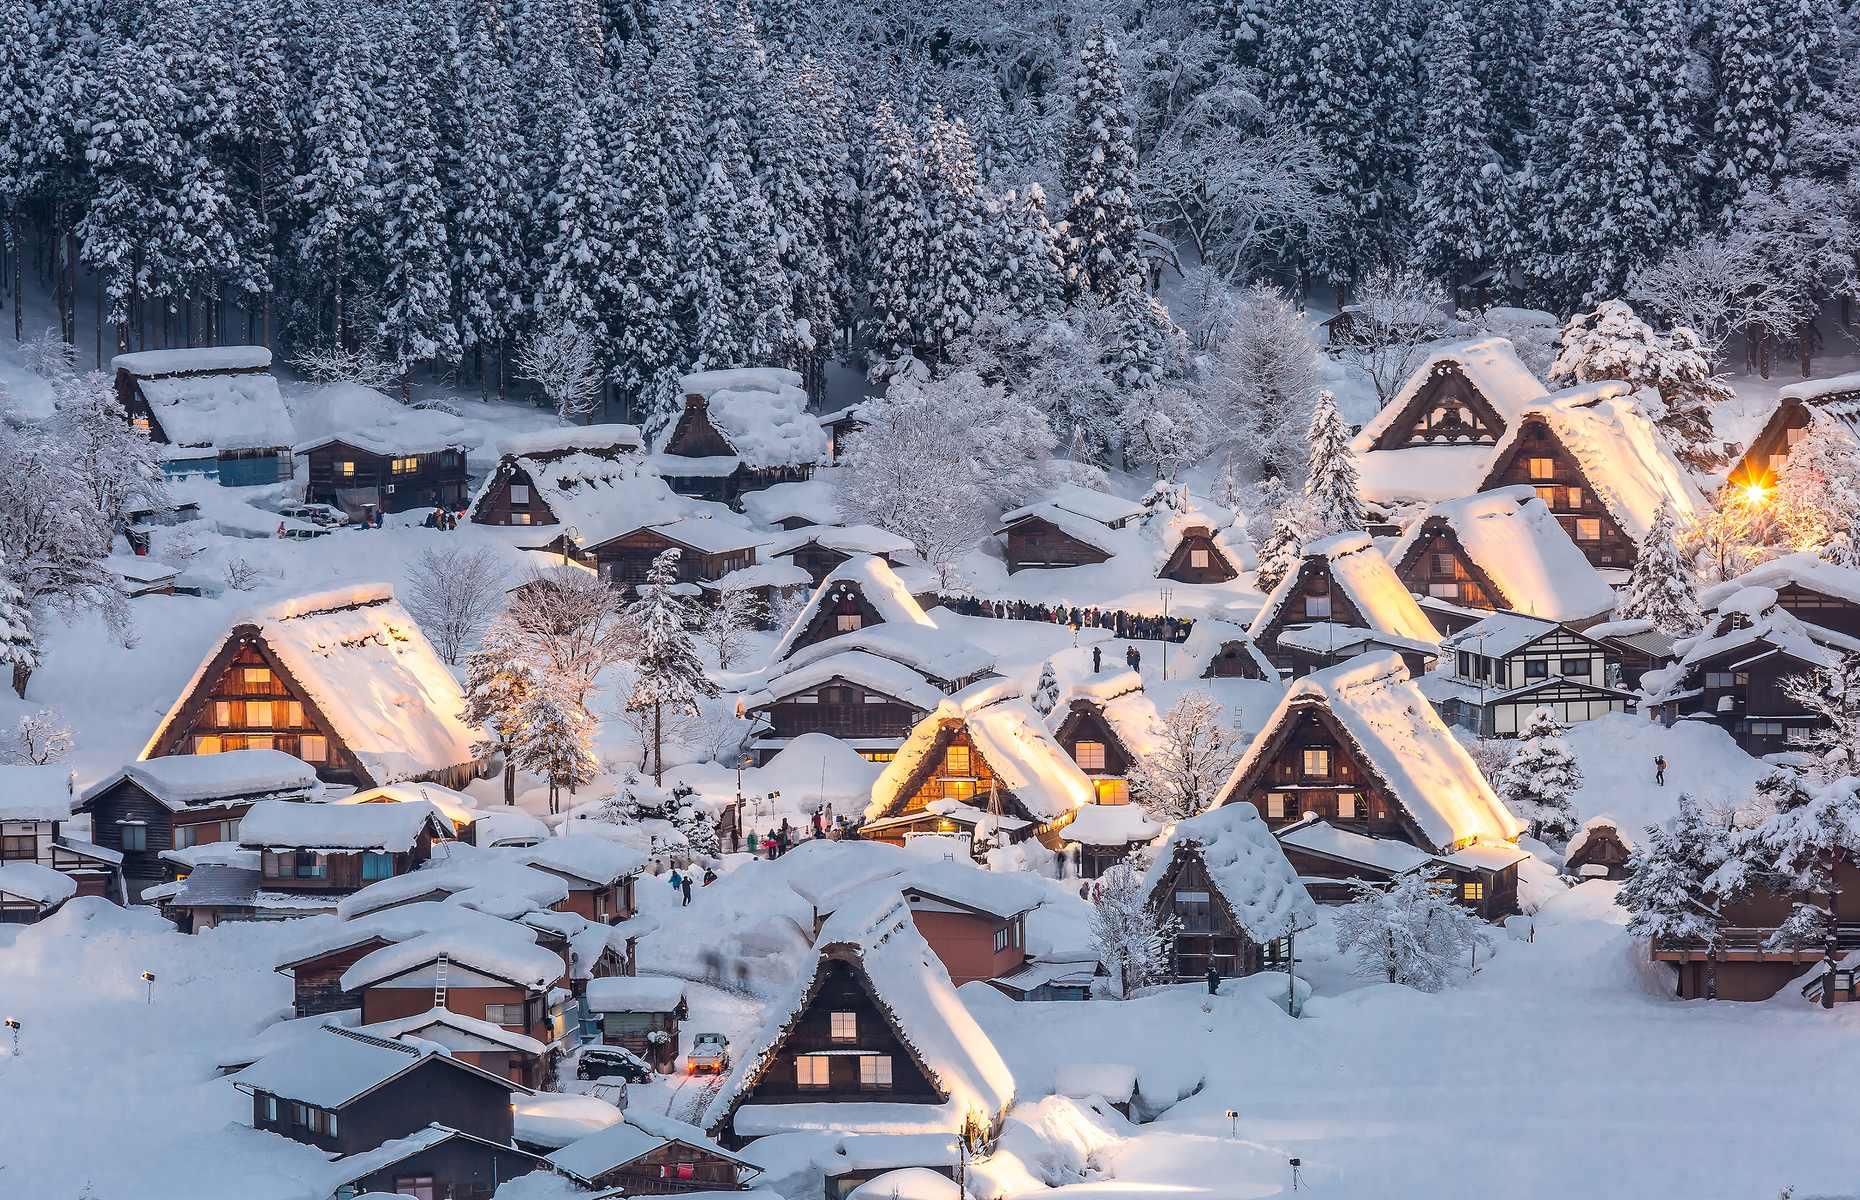 Could this little alpine village be any cuter? Located in the heart of the Shogawa Valley, tucked between remote mountains, Shirakawa-gō’s characteristic steep-roofed houses are as practical as they are pretty. Built in Gassho-zukuri style (which means "constructed like hands in prayer") their rooftops are designed to withstand heavy snowfall. Pictured in winter here, illuminated by glimmering lights, it looks like a miniature fantasy world.